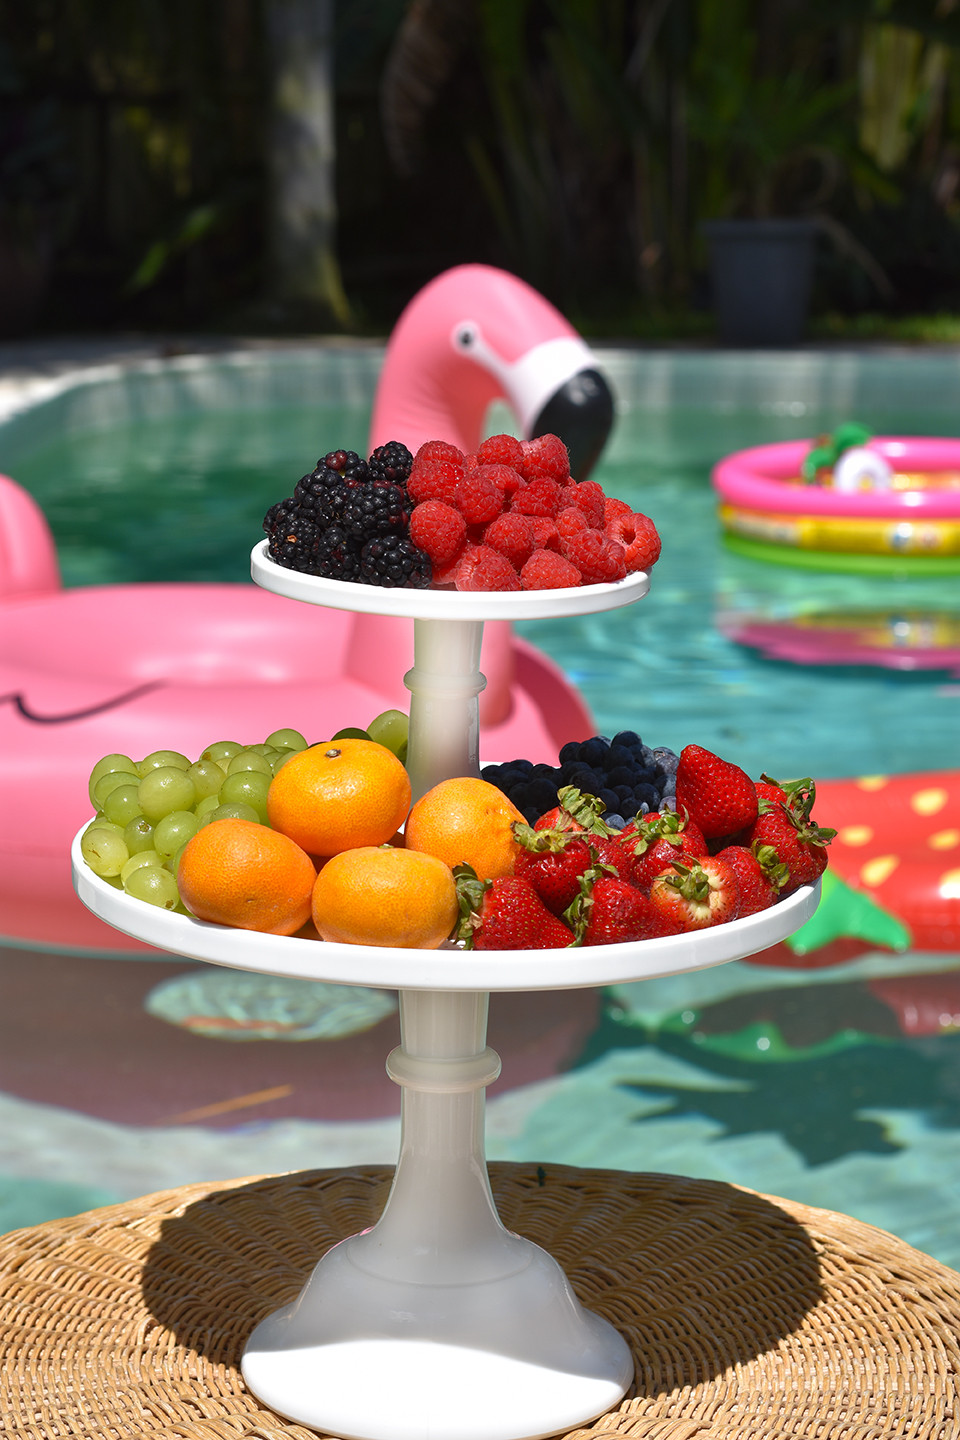 Pool Party Ideas
 Pool Party Ideas for Adults • Happy Family Blog